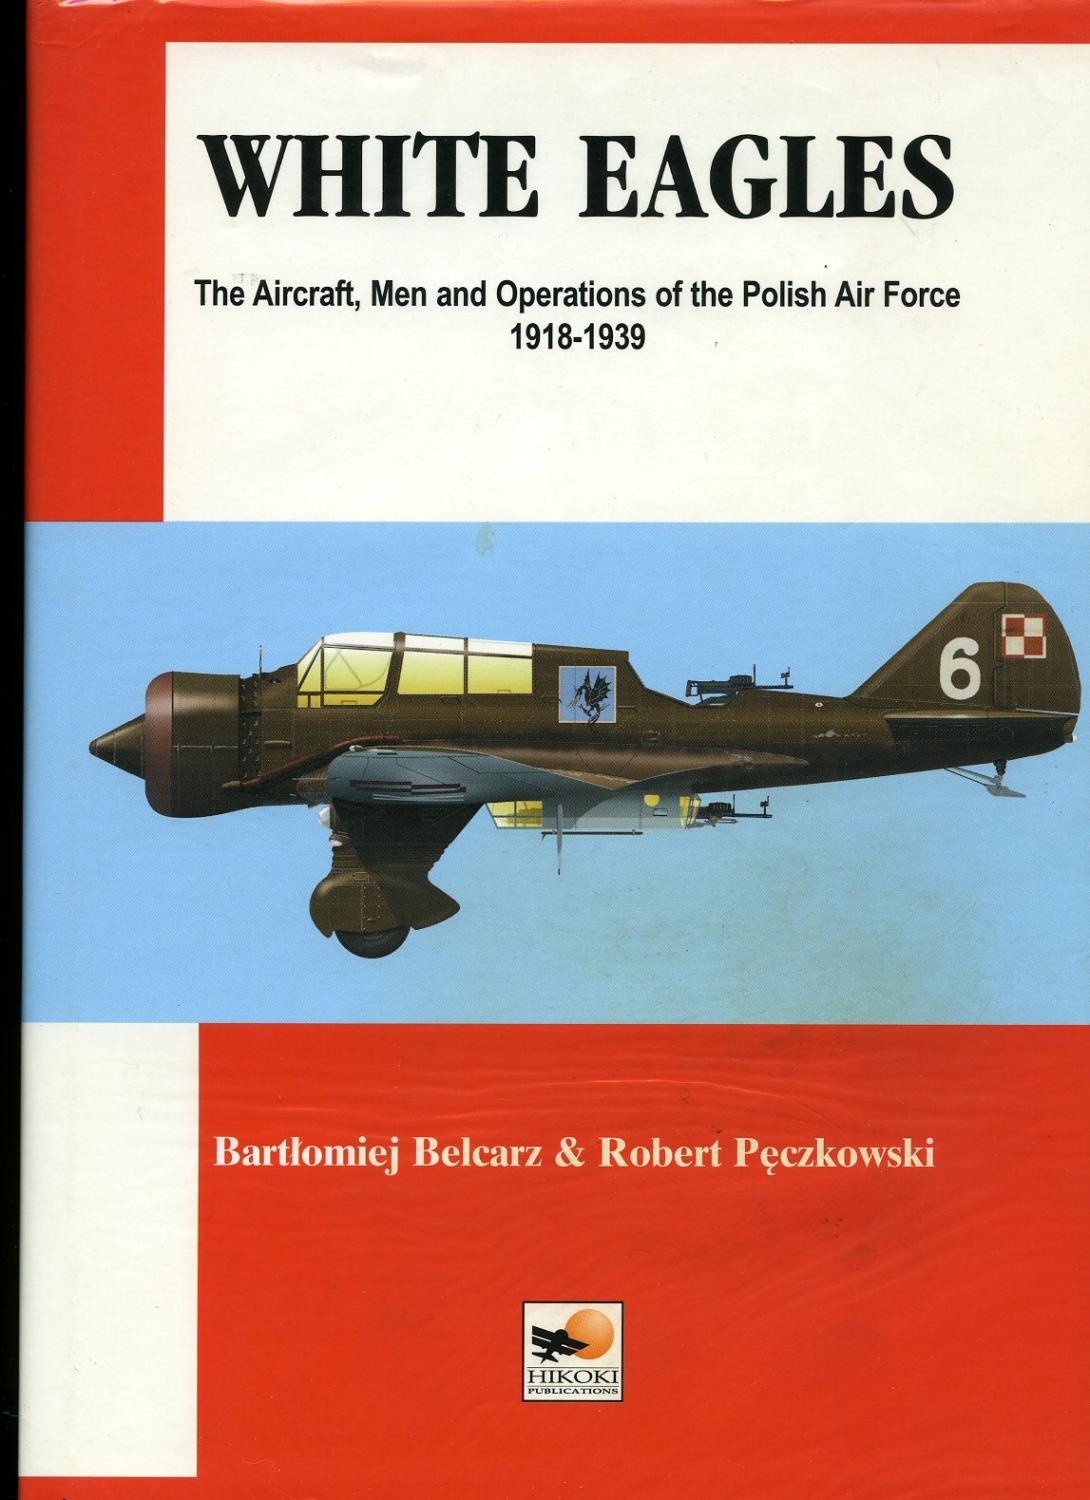 White Eagles: The Aircraft, Men and Operations of the Polish Air Force 1918-1939